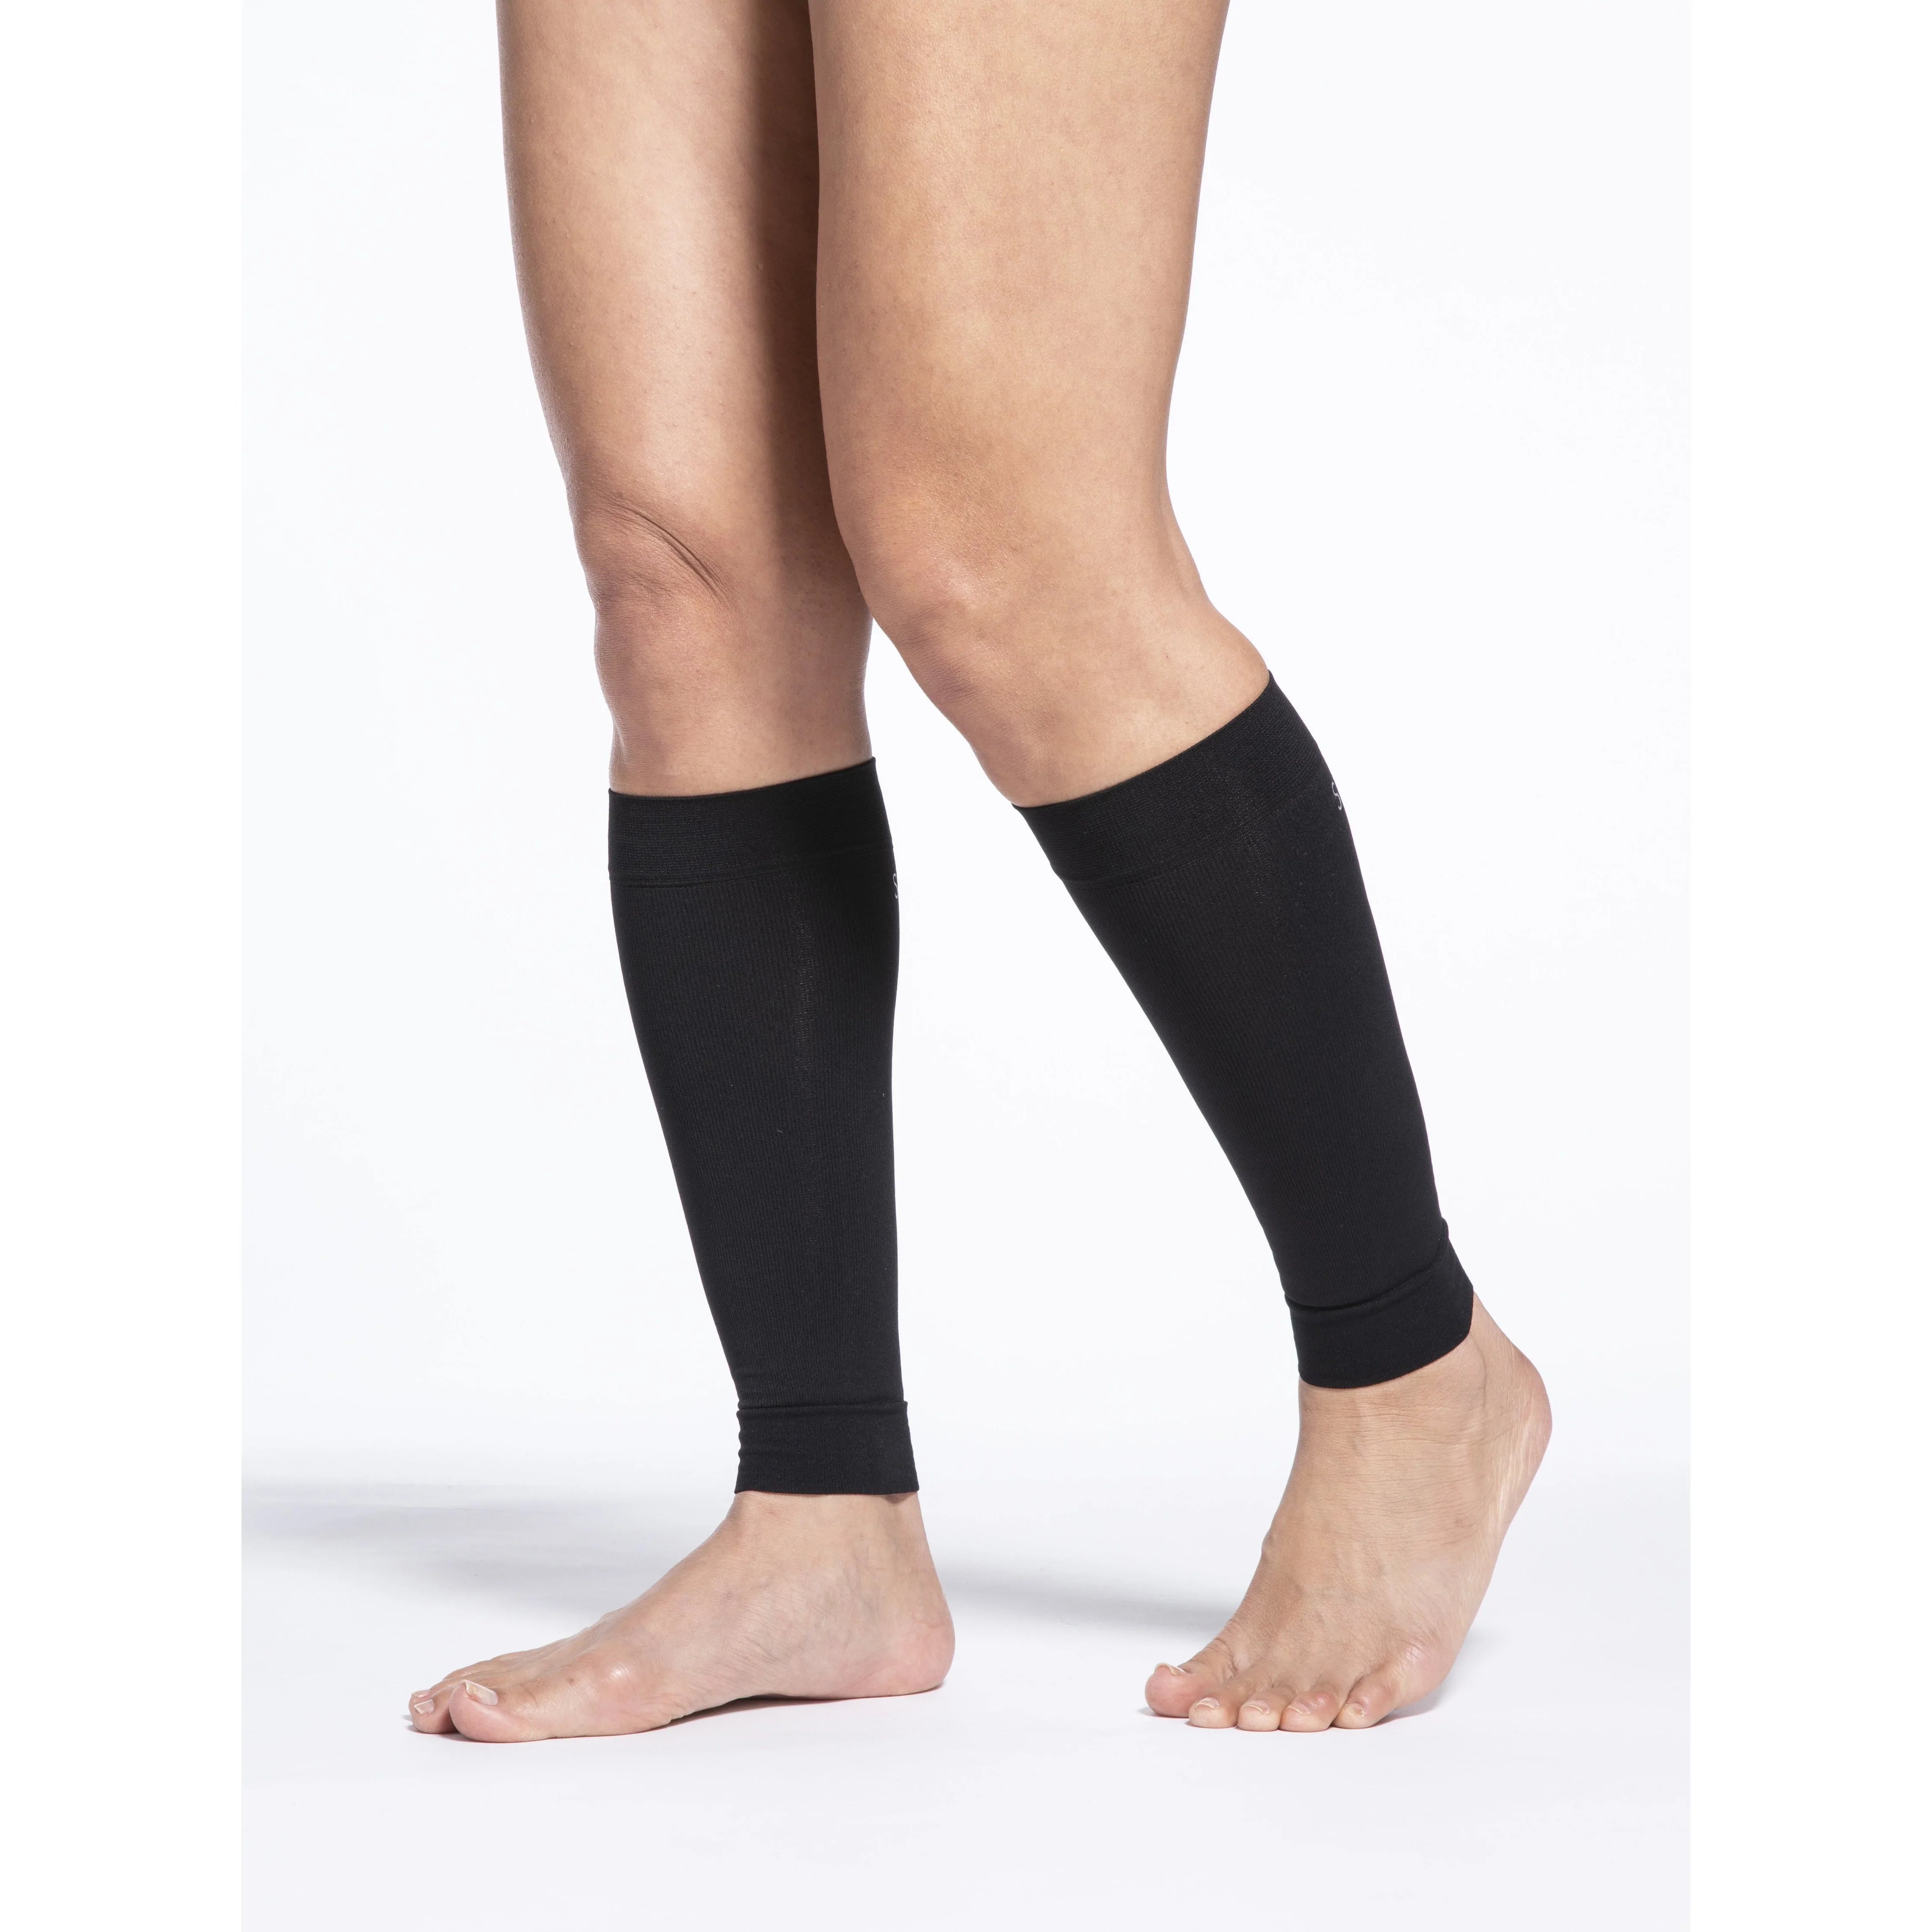 Sigvaris Chipsleeve Standard Calf & Foot – Compression Store